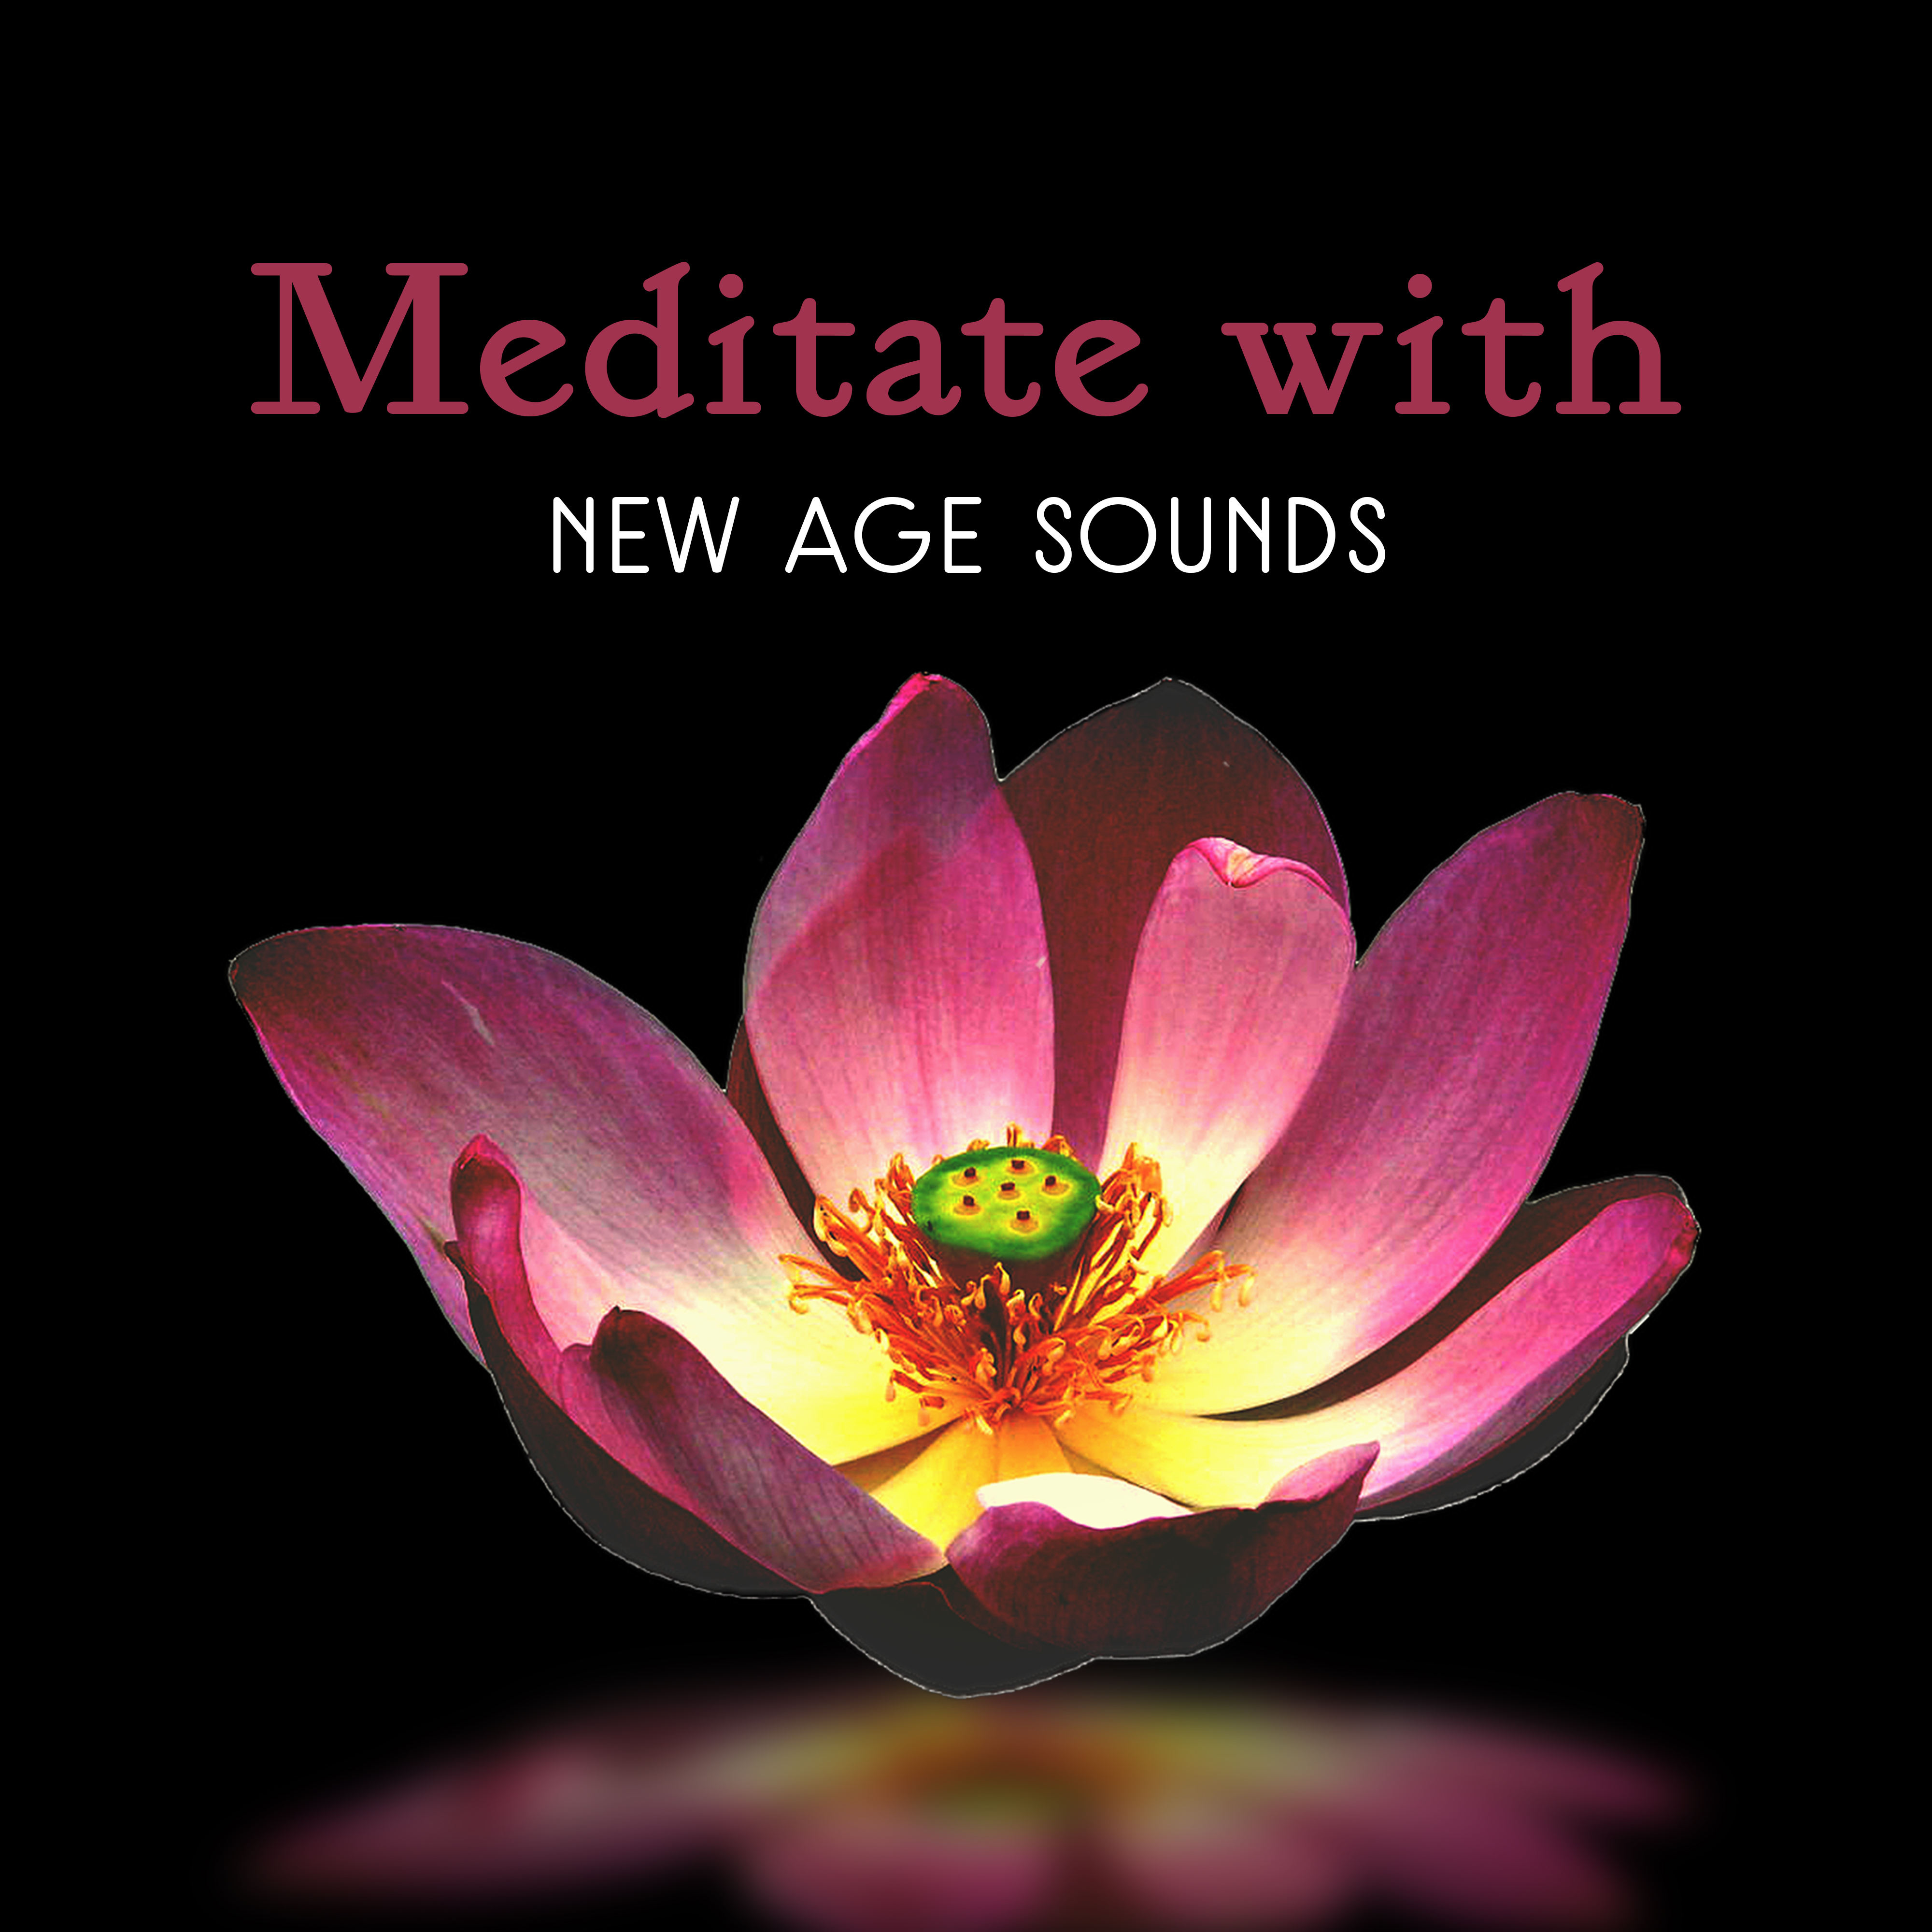 Meditate with New Age Sounds  Meditate  Rest, Mind  Body Relaxation, Spirit Journey, Inner Peace